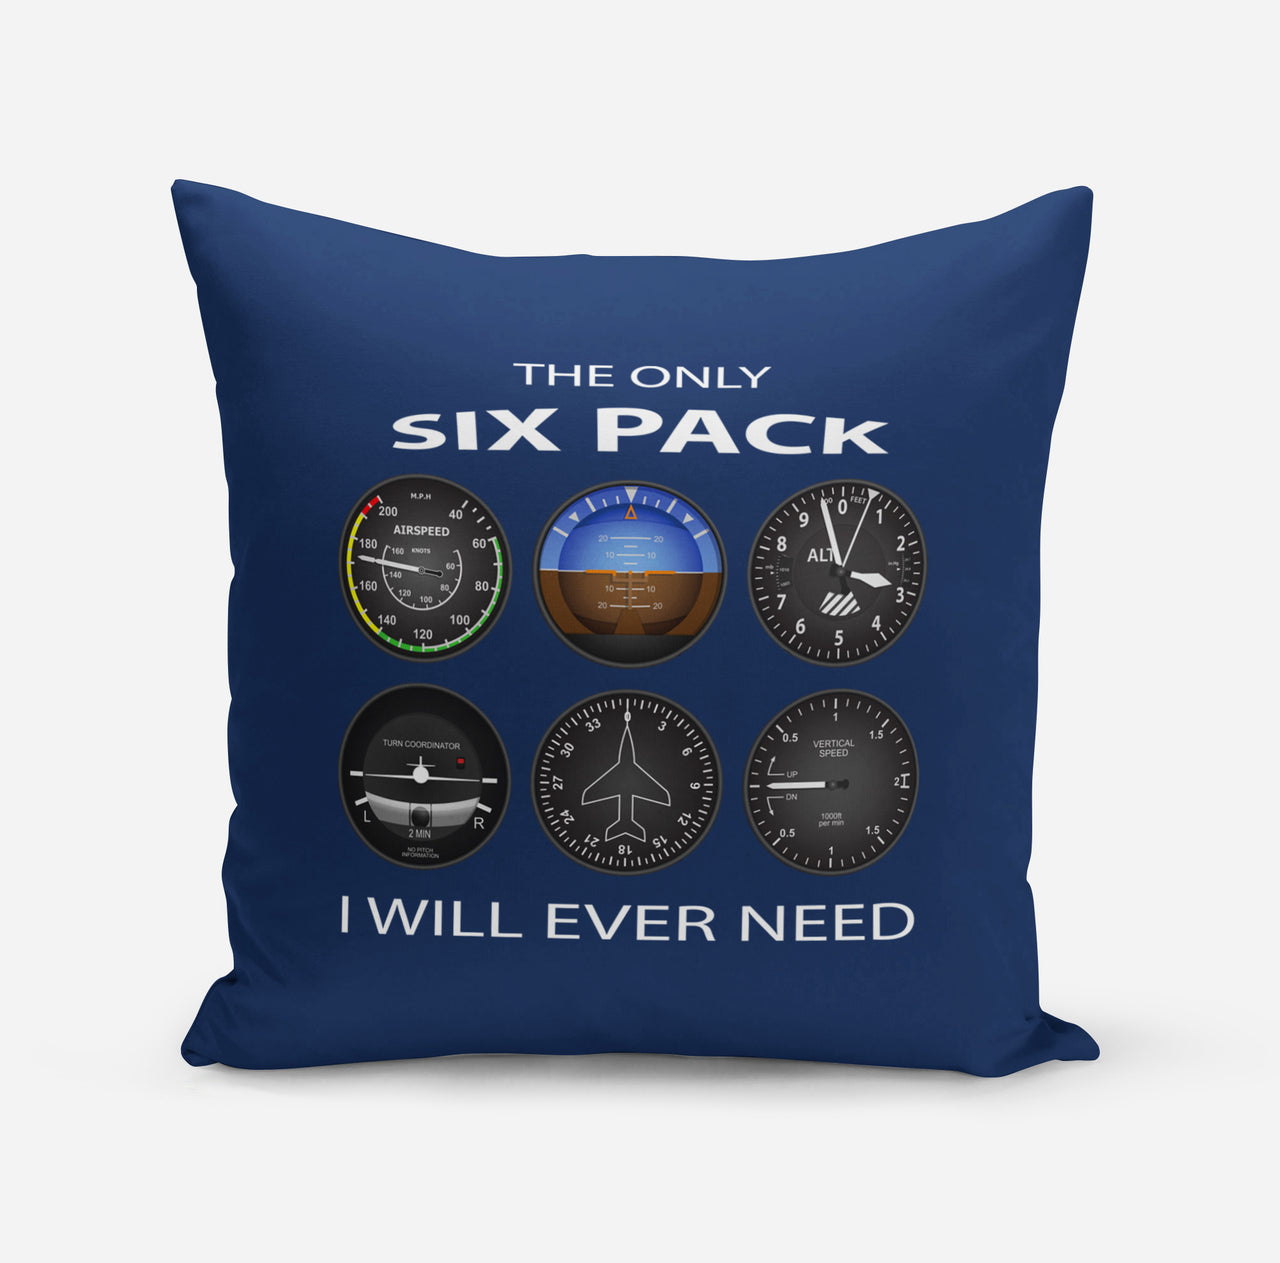 The Only Six Pack I Will Ever Need Designed Pillows